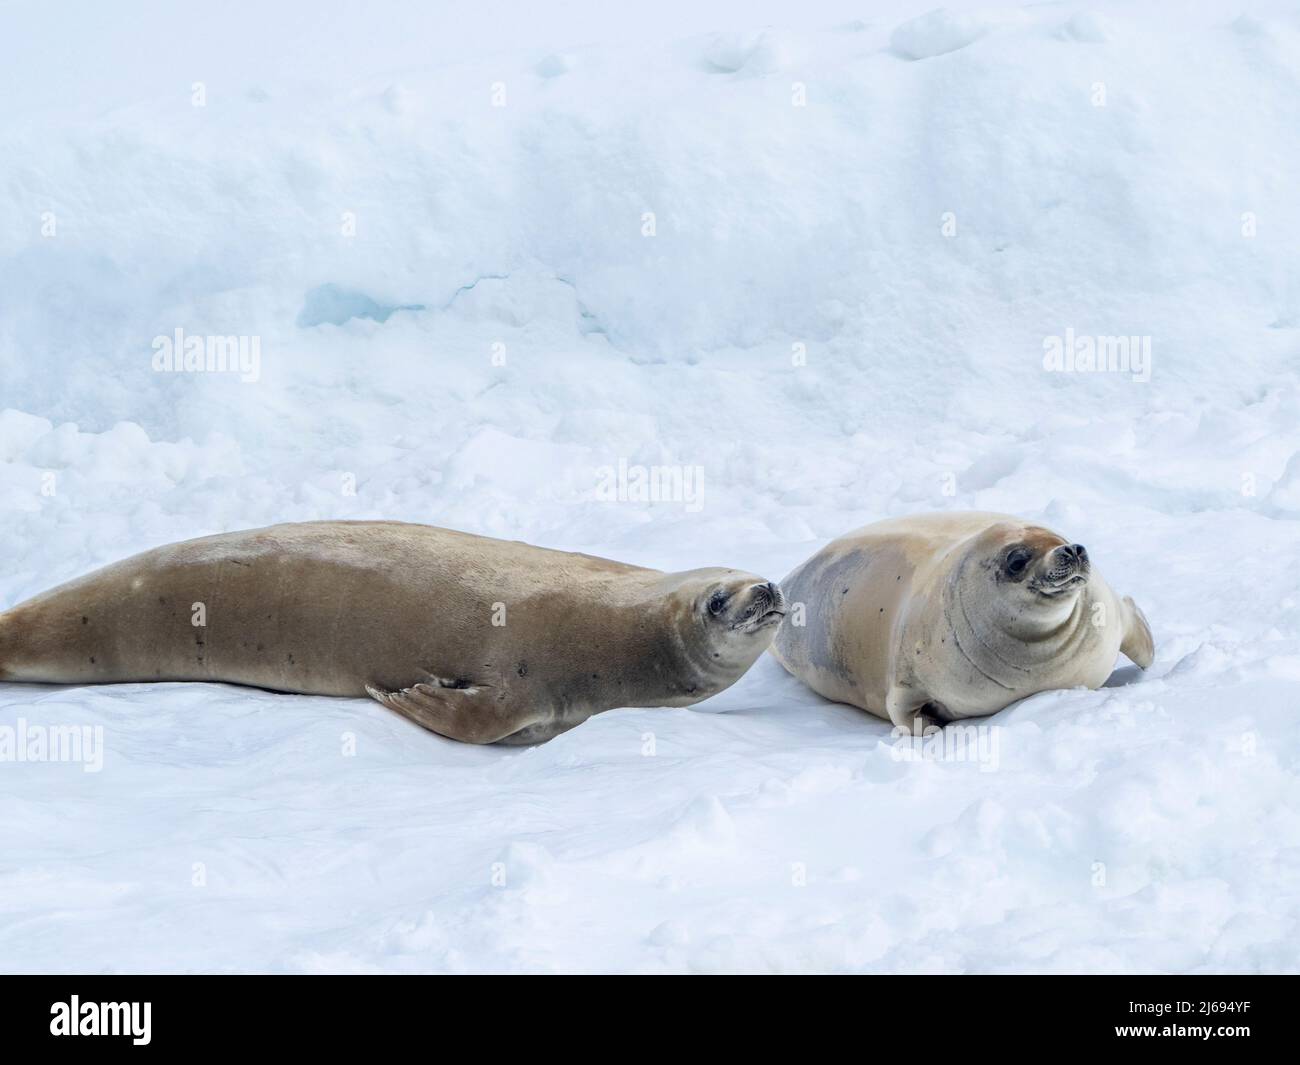 Adult crabeater seals (Lobodon carcinophaga), on ice in the Lemaire Channel, Antarctica, Polar Regions Stock Photo